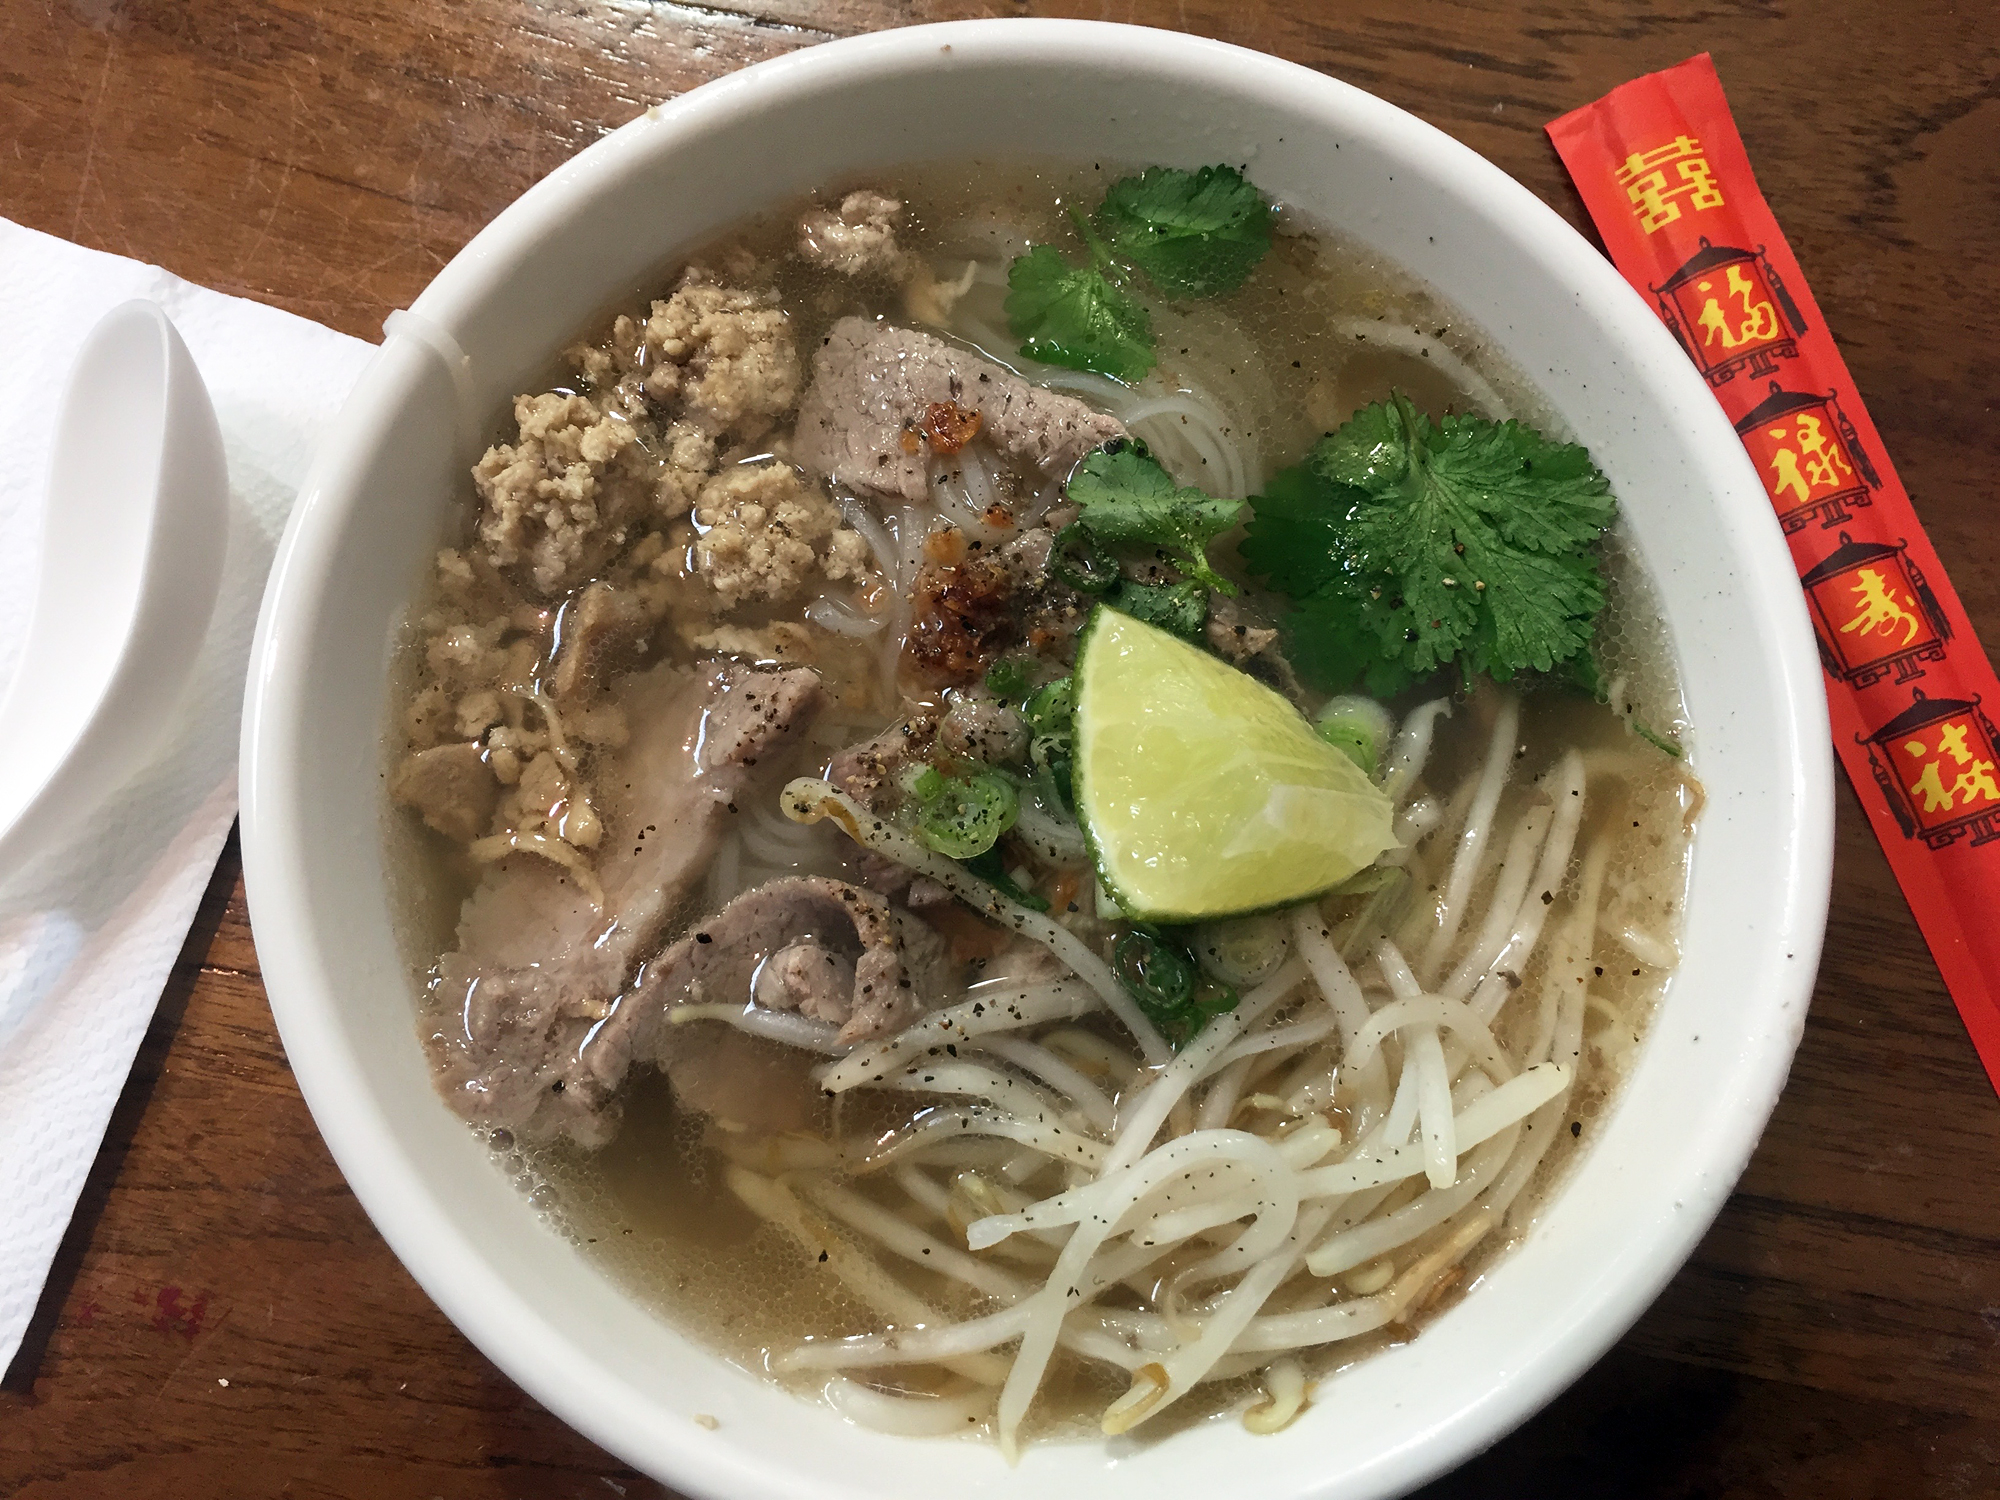 The Phnom Penh features rice noodles, sliced and ground pork in a rich pork and shrimp broth, garnished with crispy garlic, cilantro, scallions and bean sprouts.